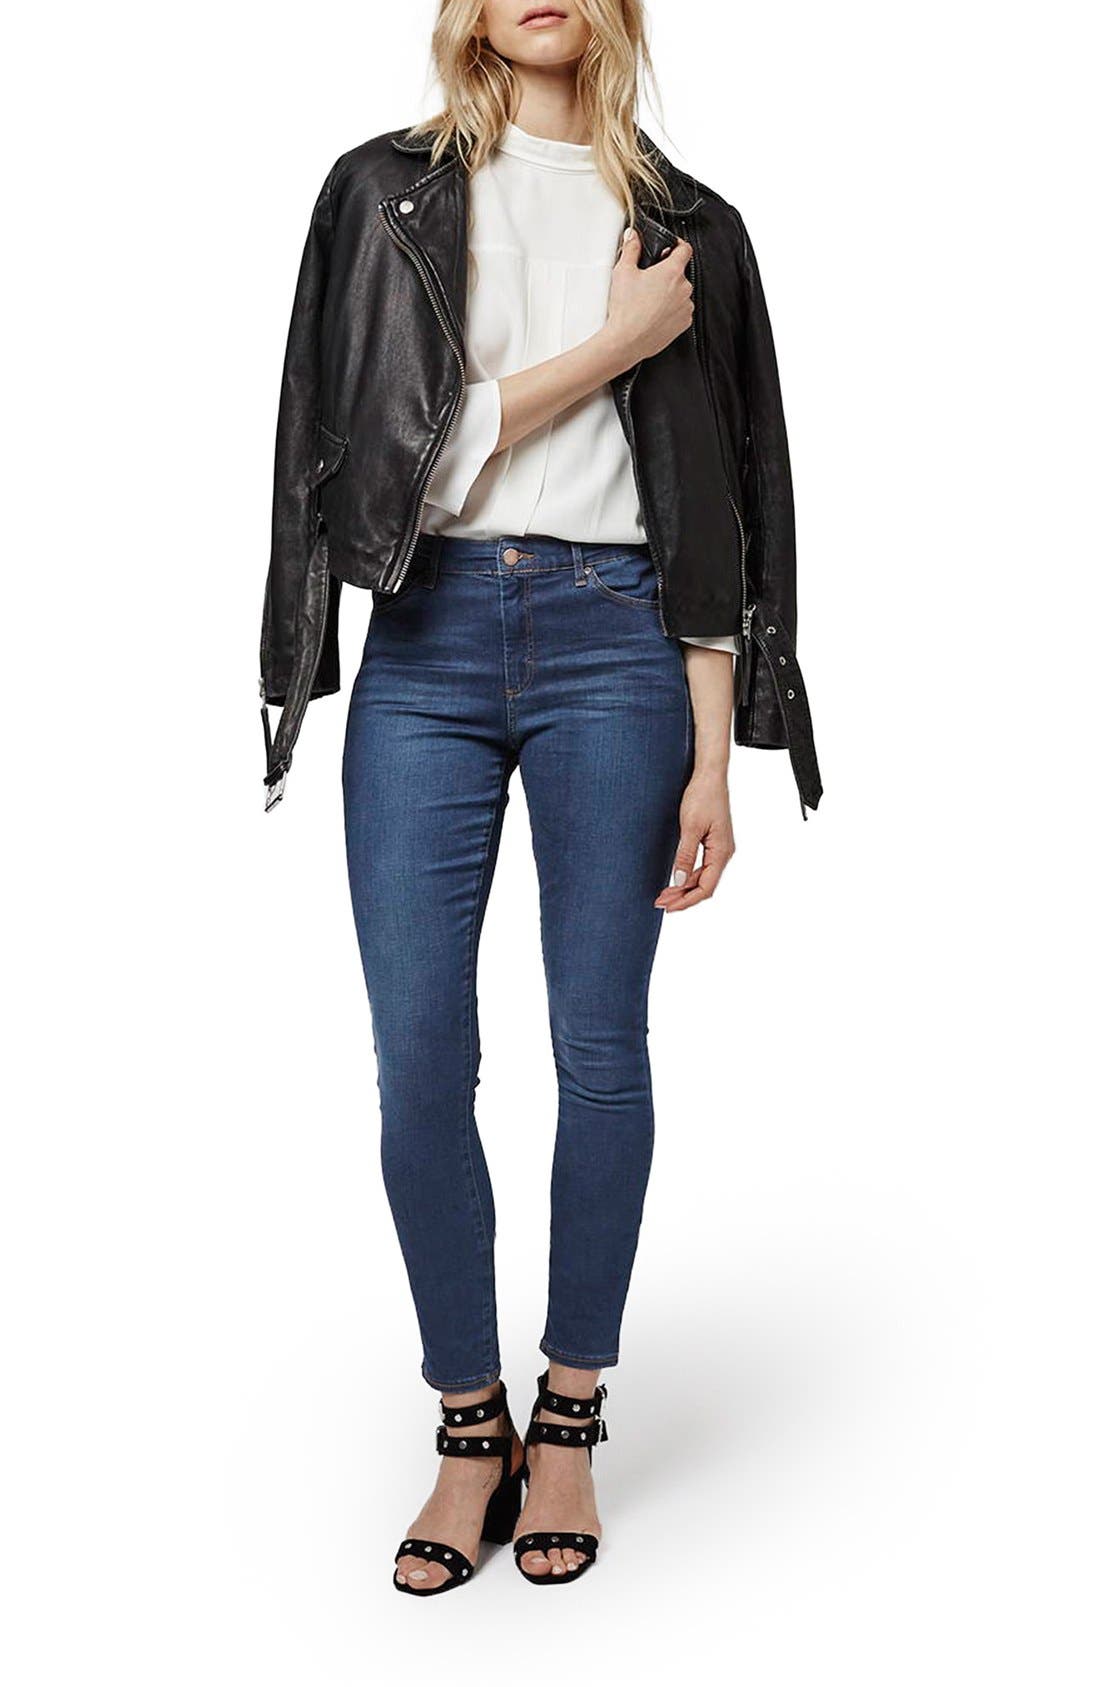 topshop leigh skinny jeans